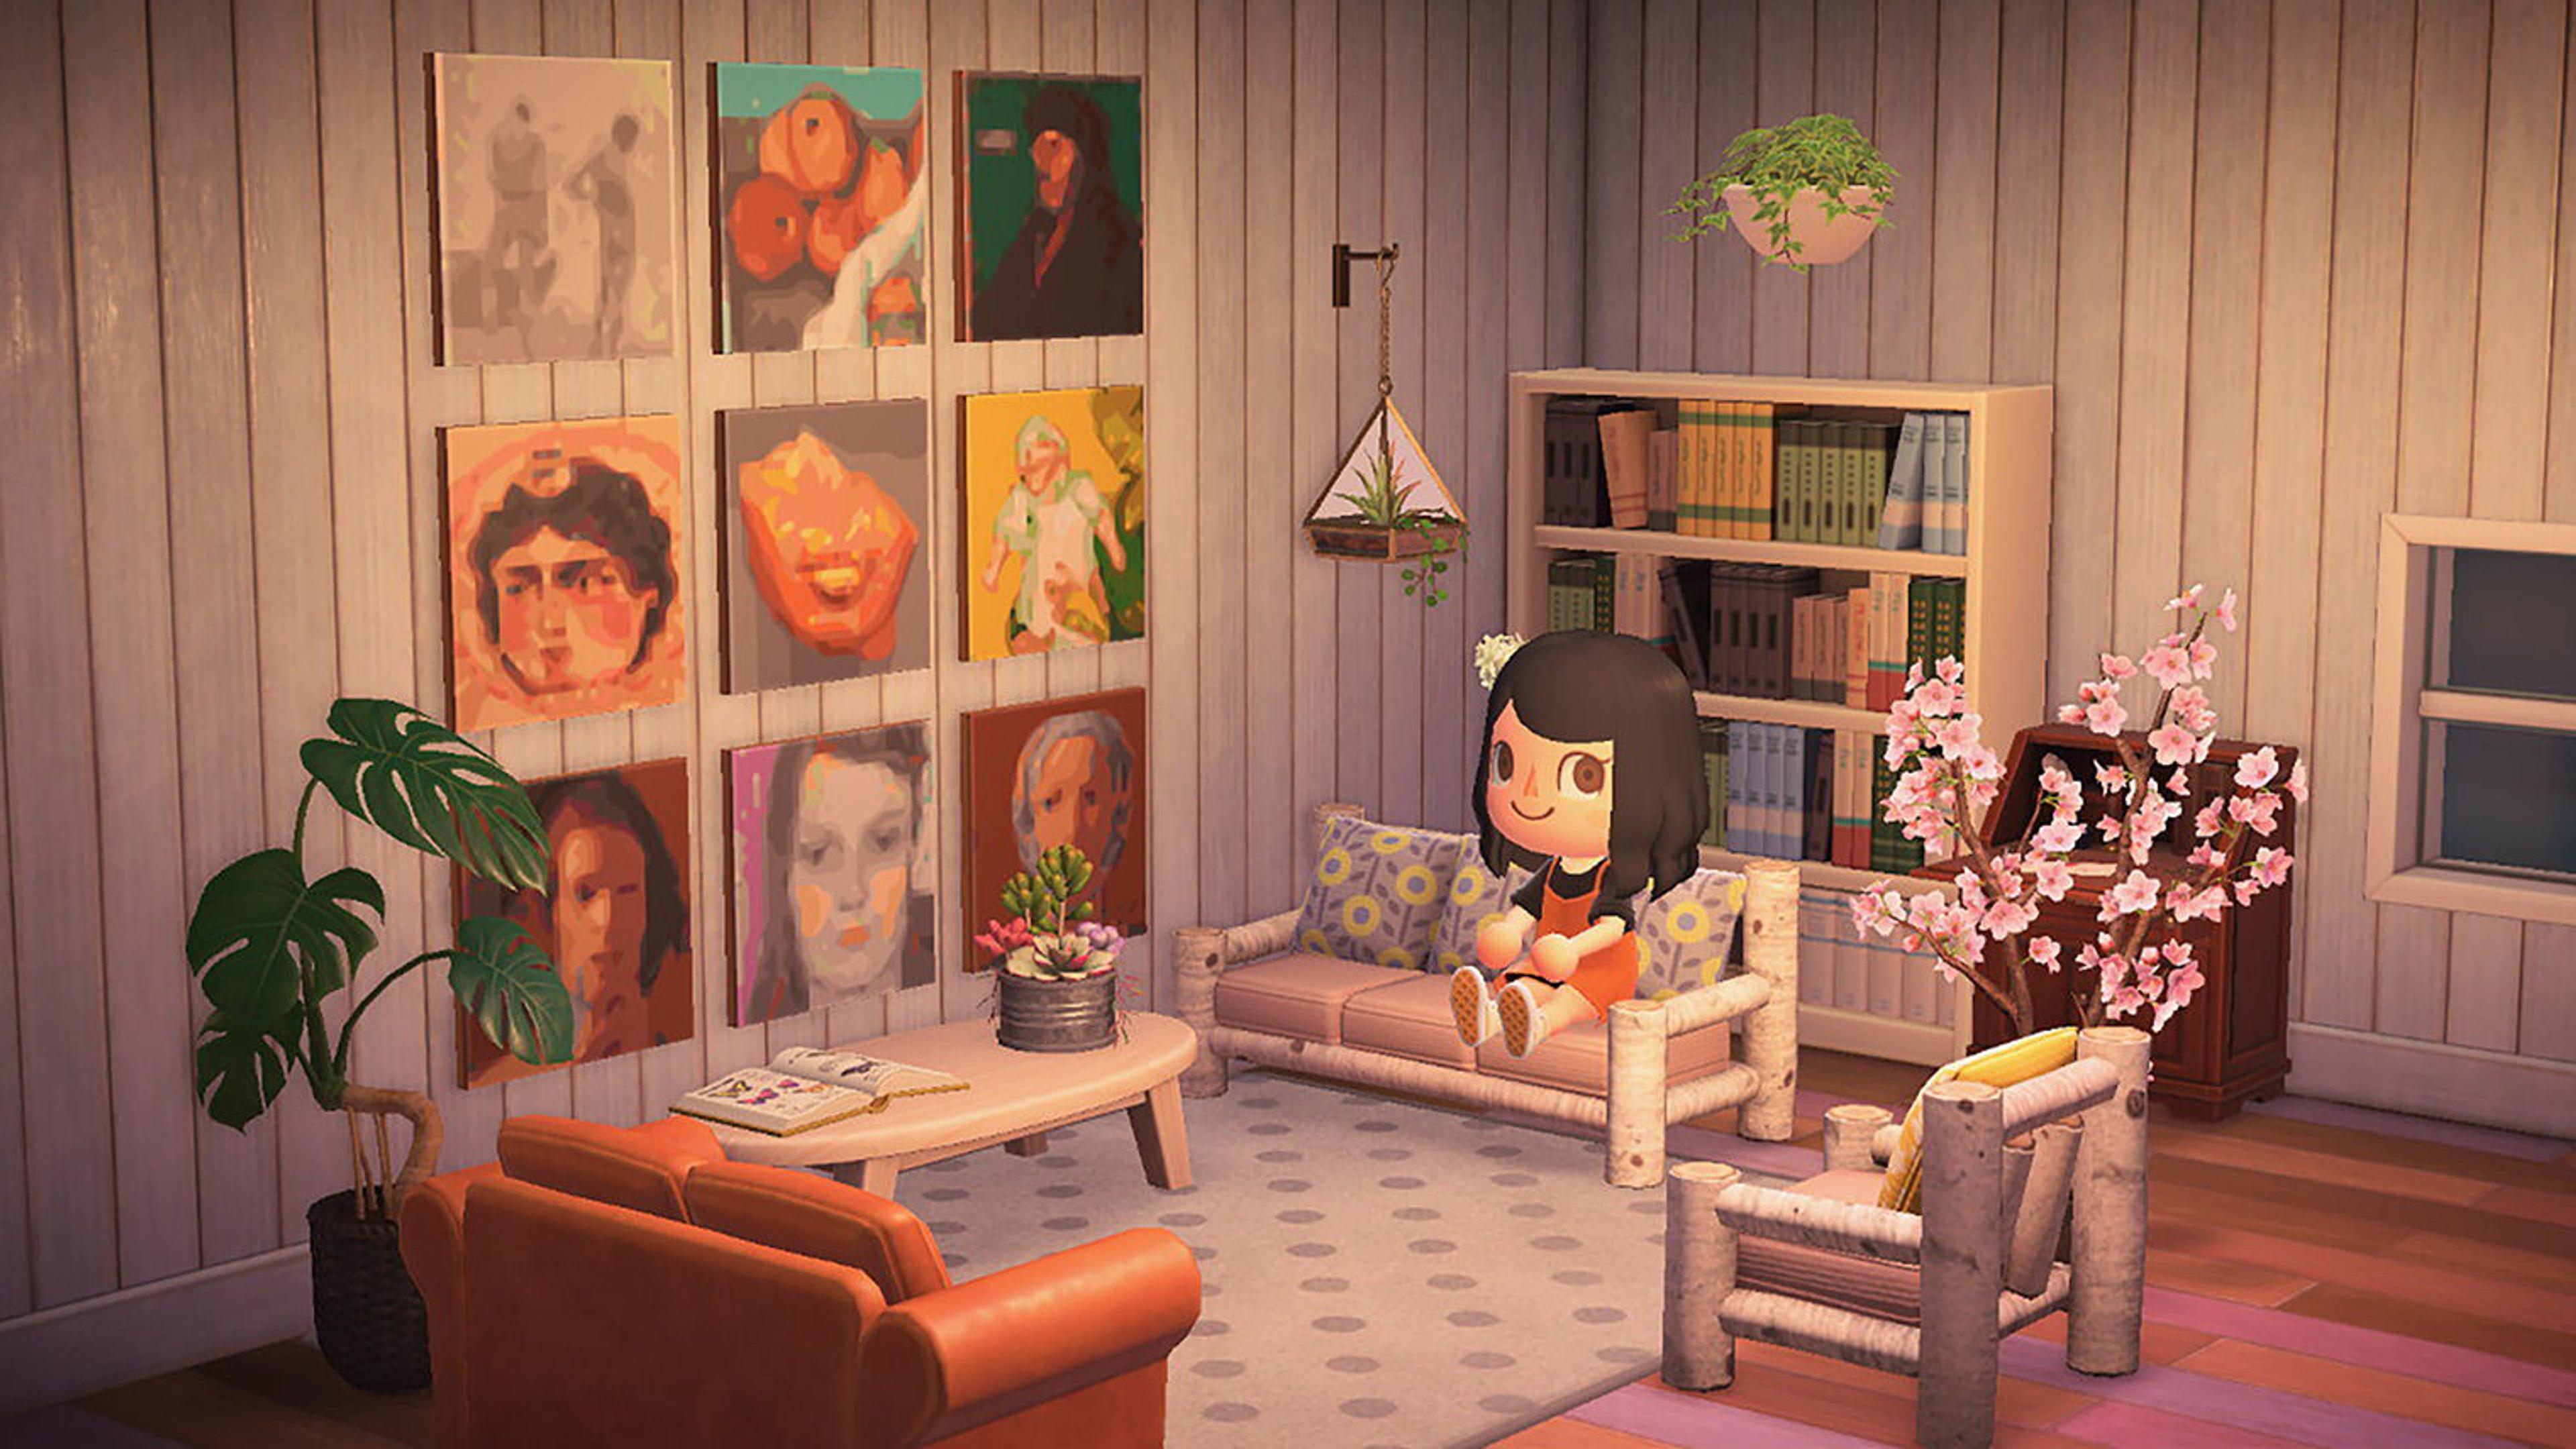 A screenshot from Animal Crossing depicting a living room filled with art